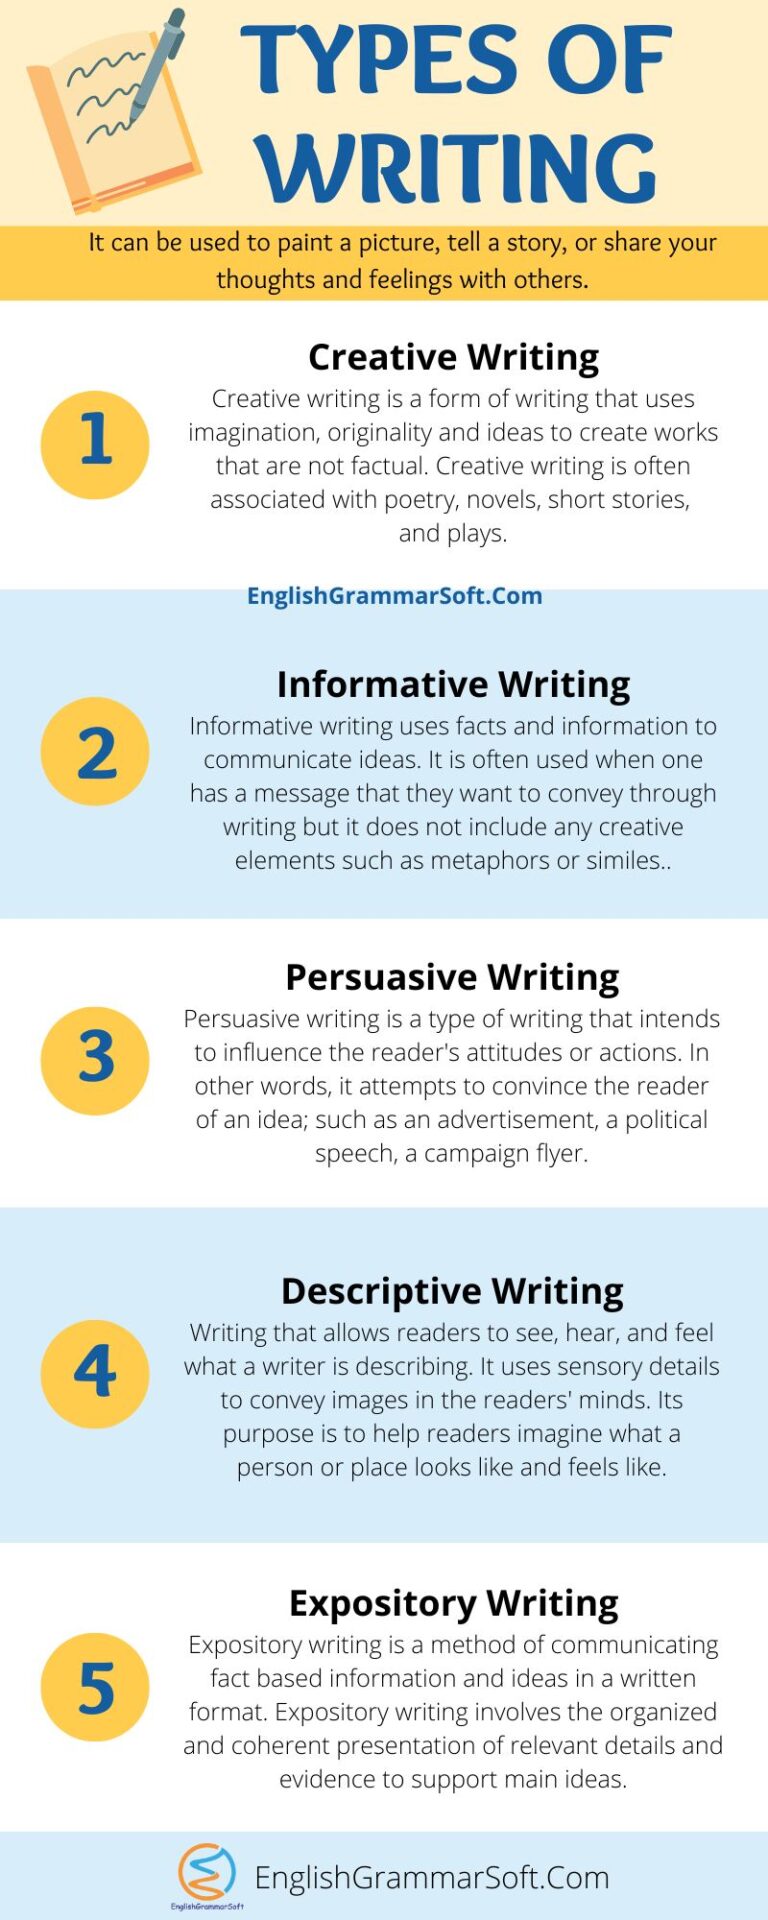 What are the 5 Types of Writing